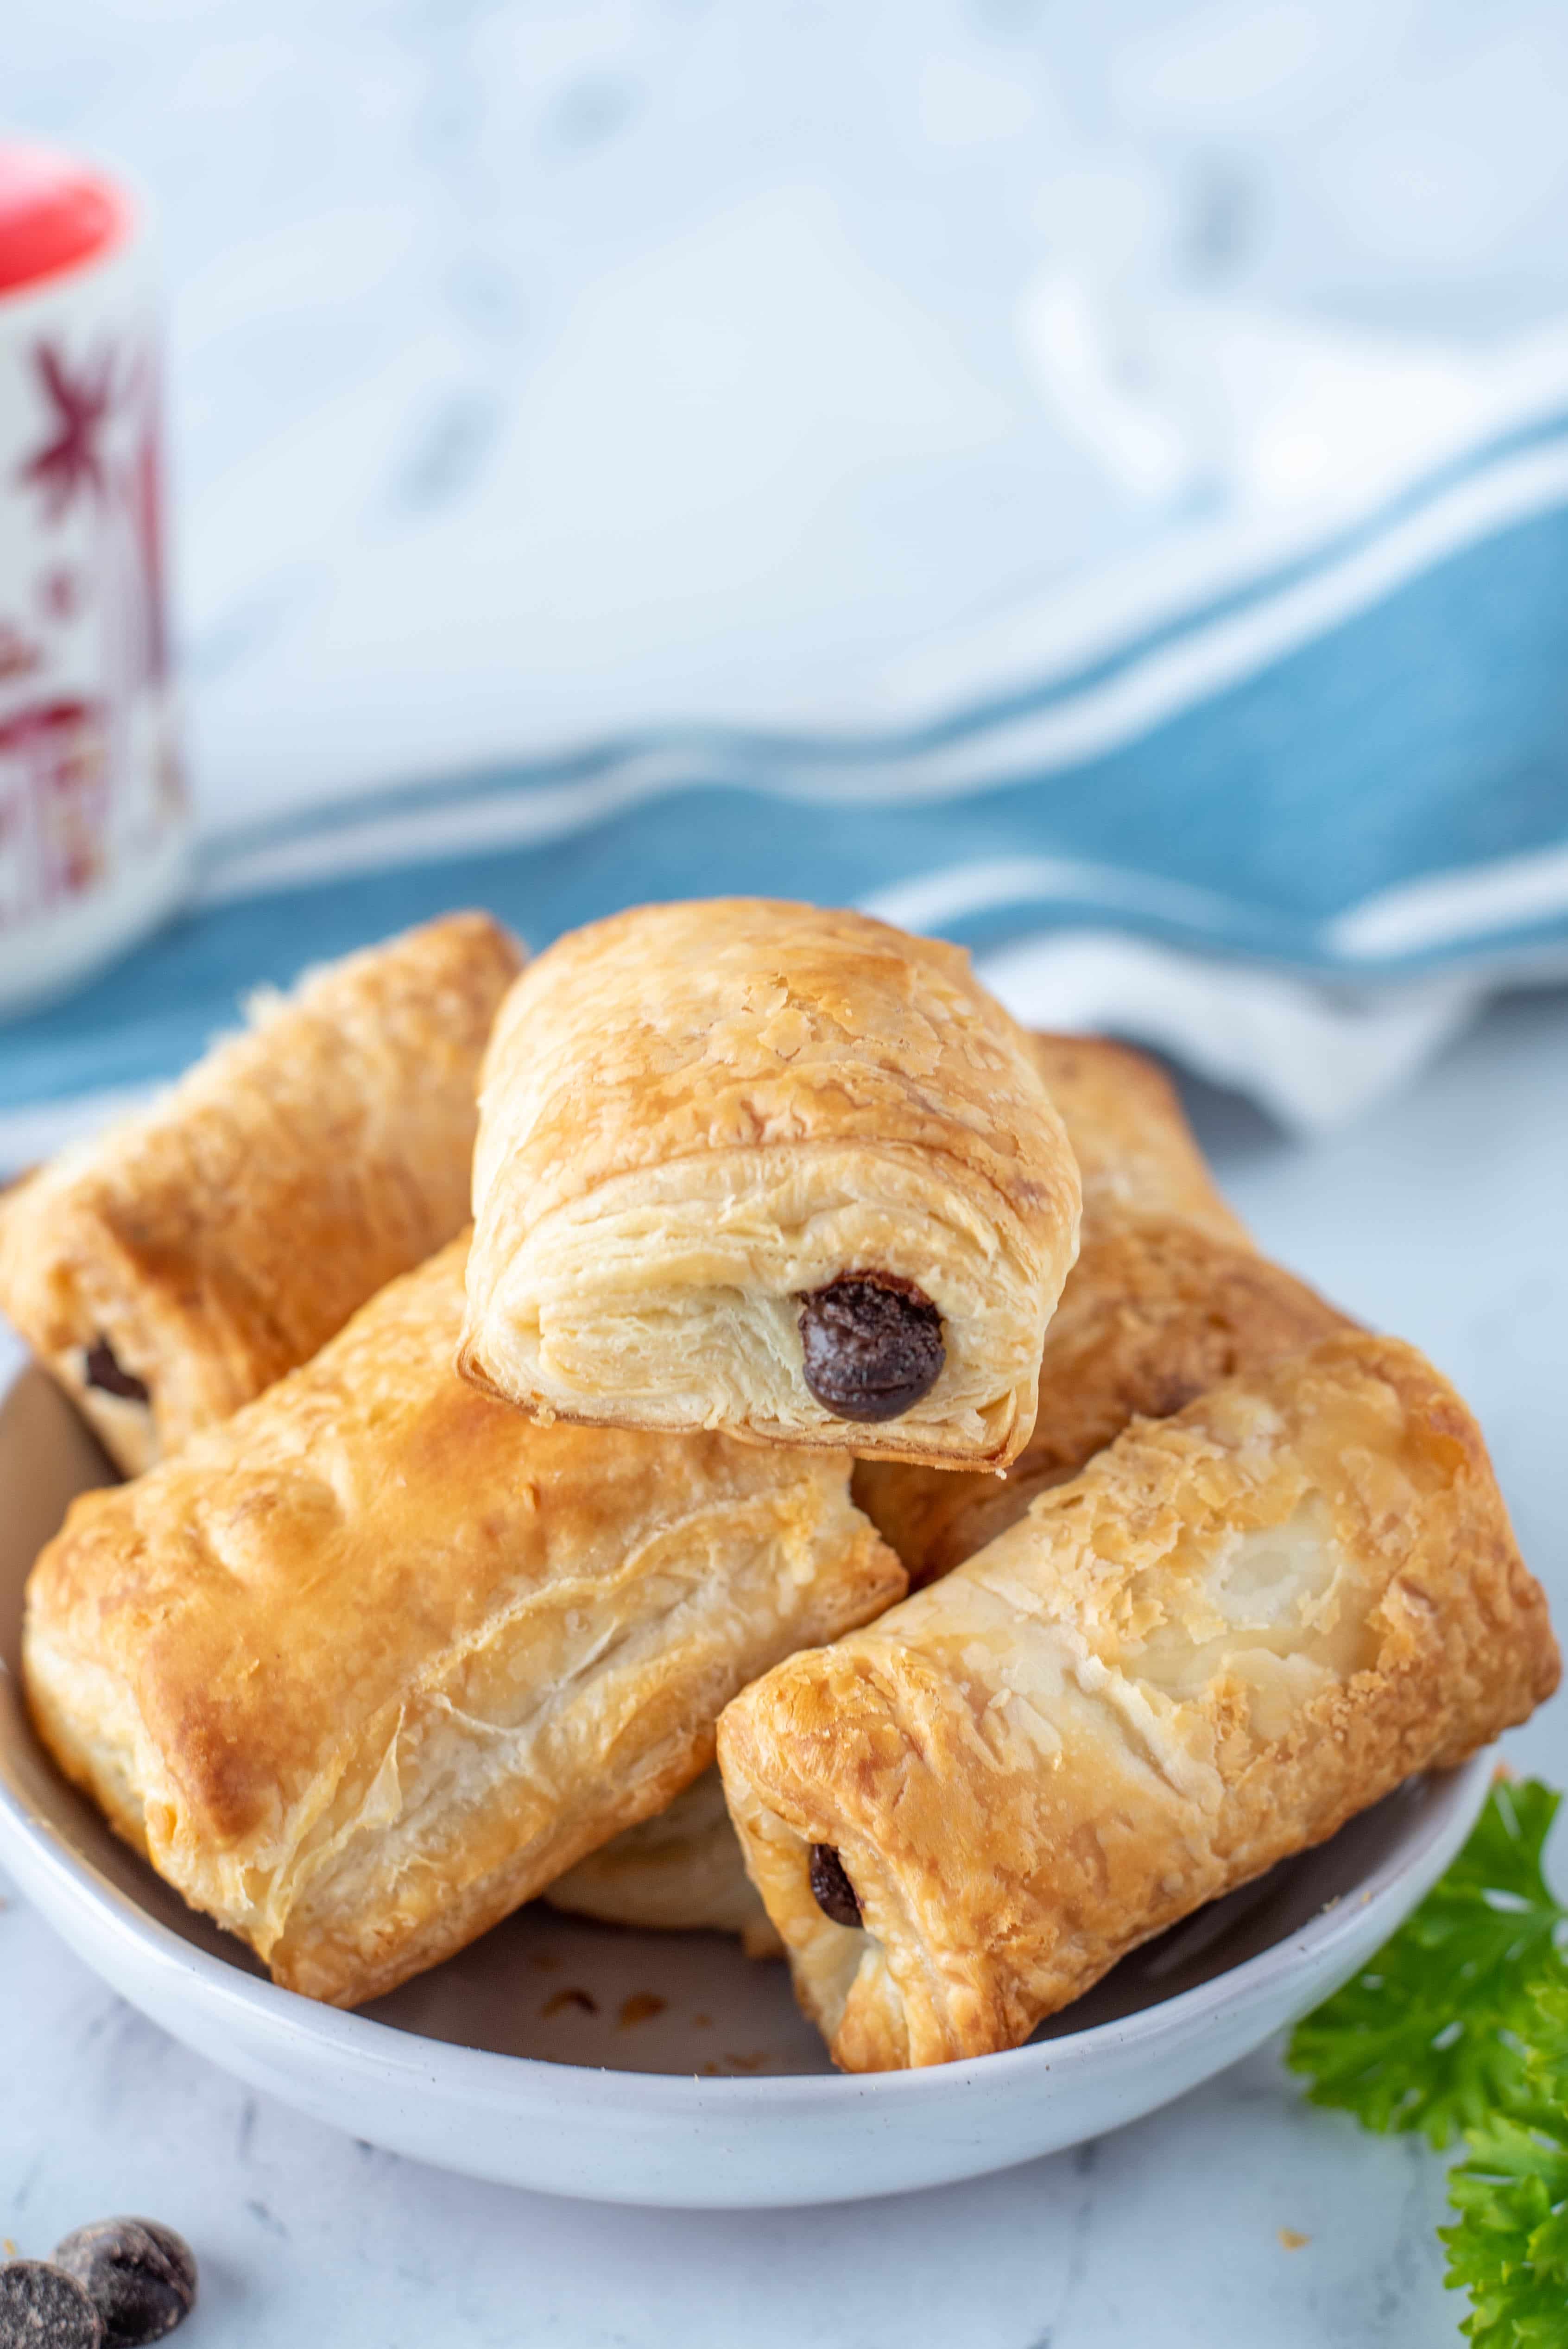 5 Mouthwatering Ways to Hack a Can of Pillsbury Crescent Rolls